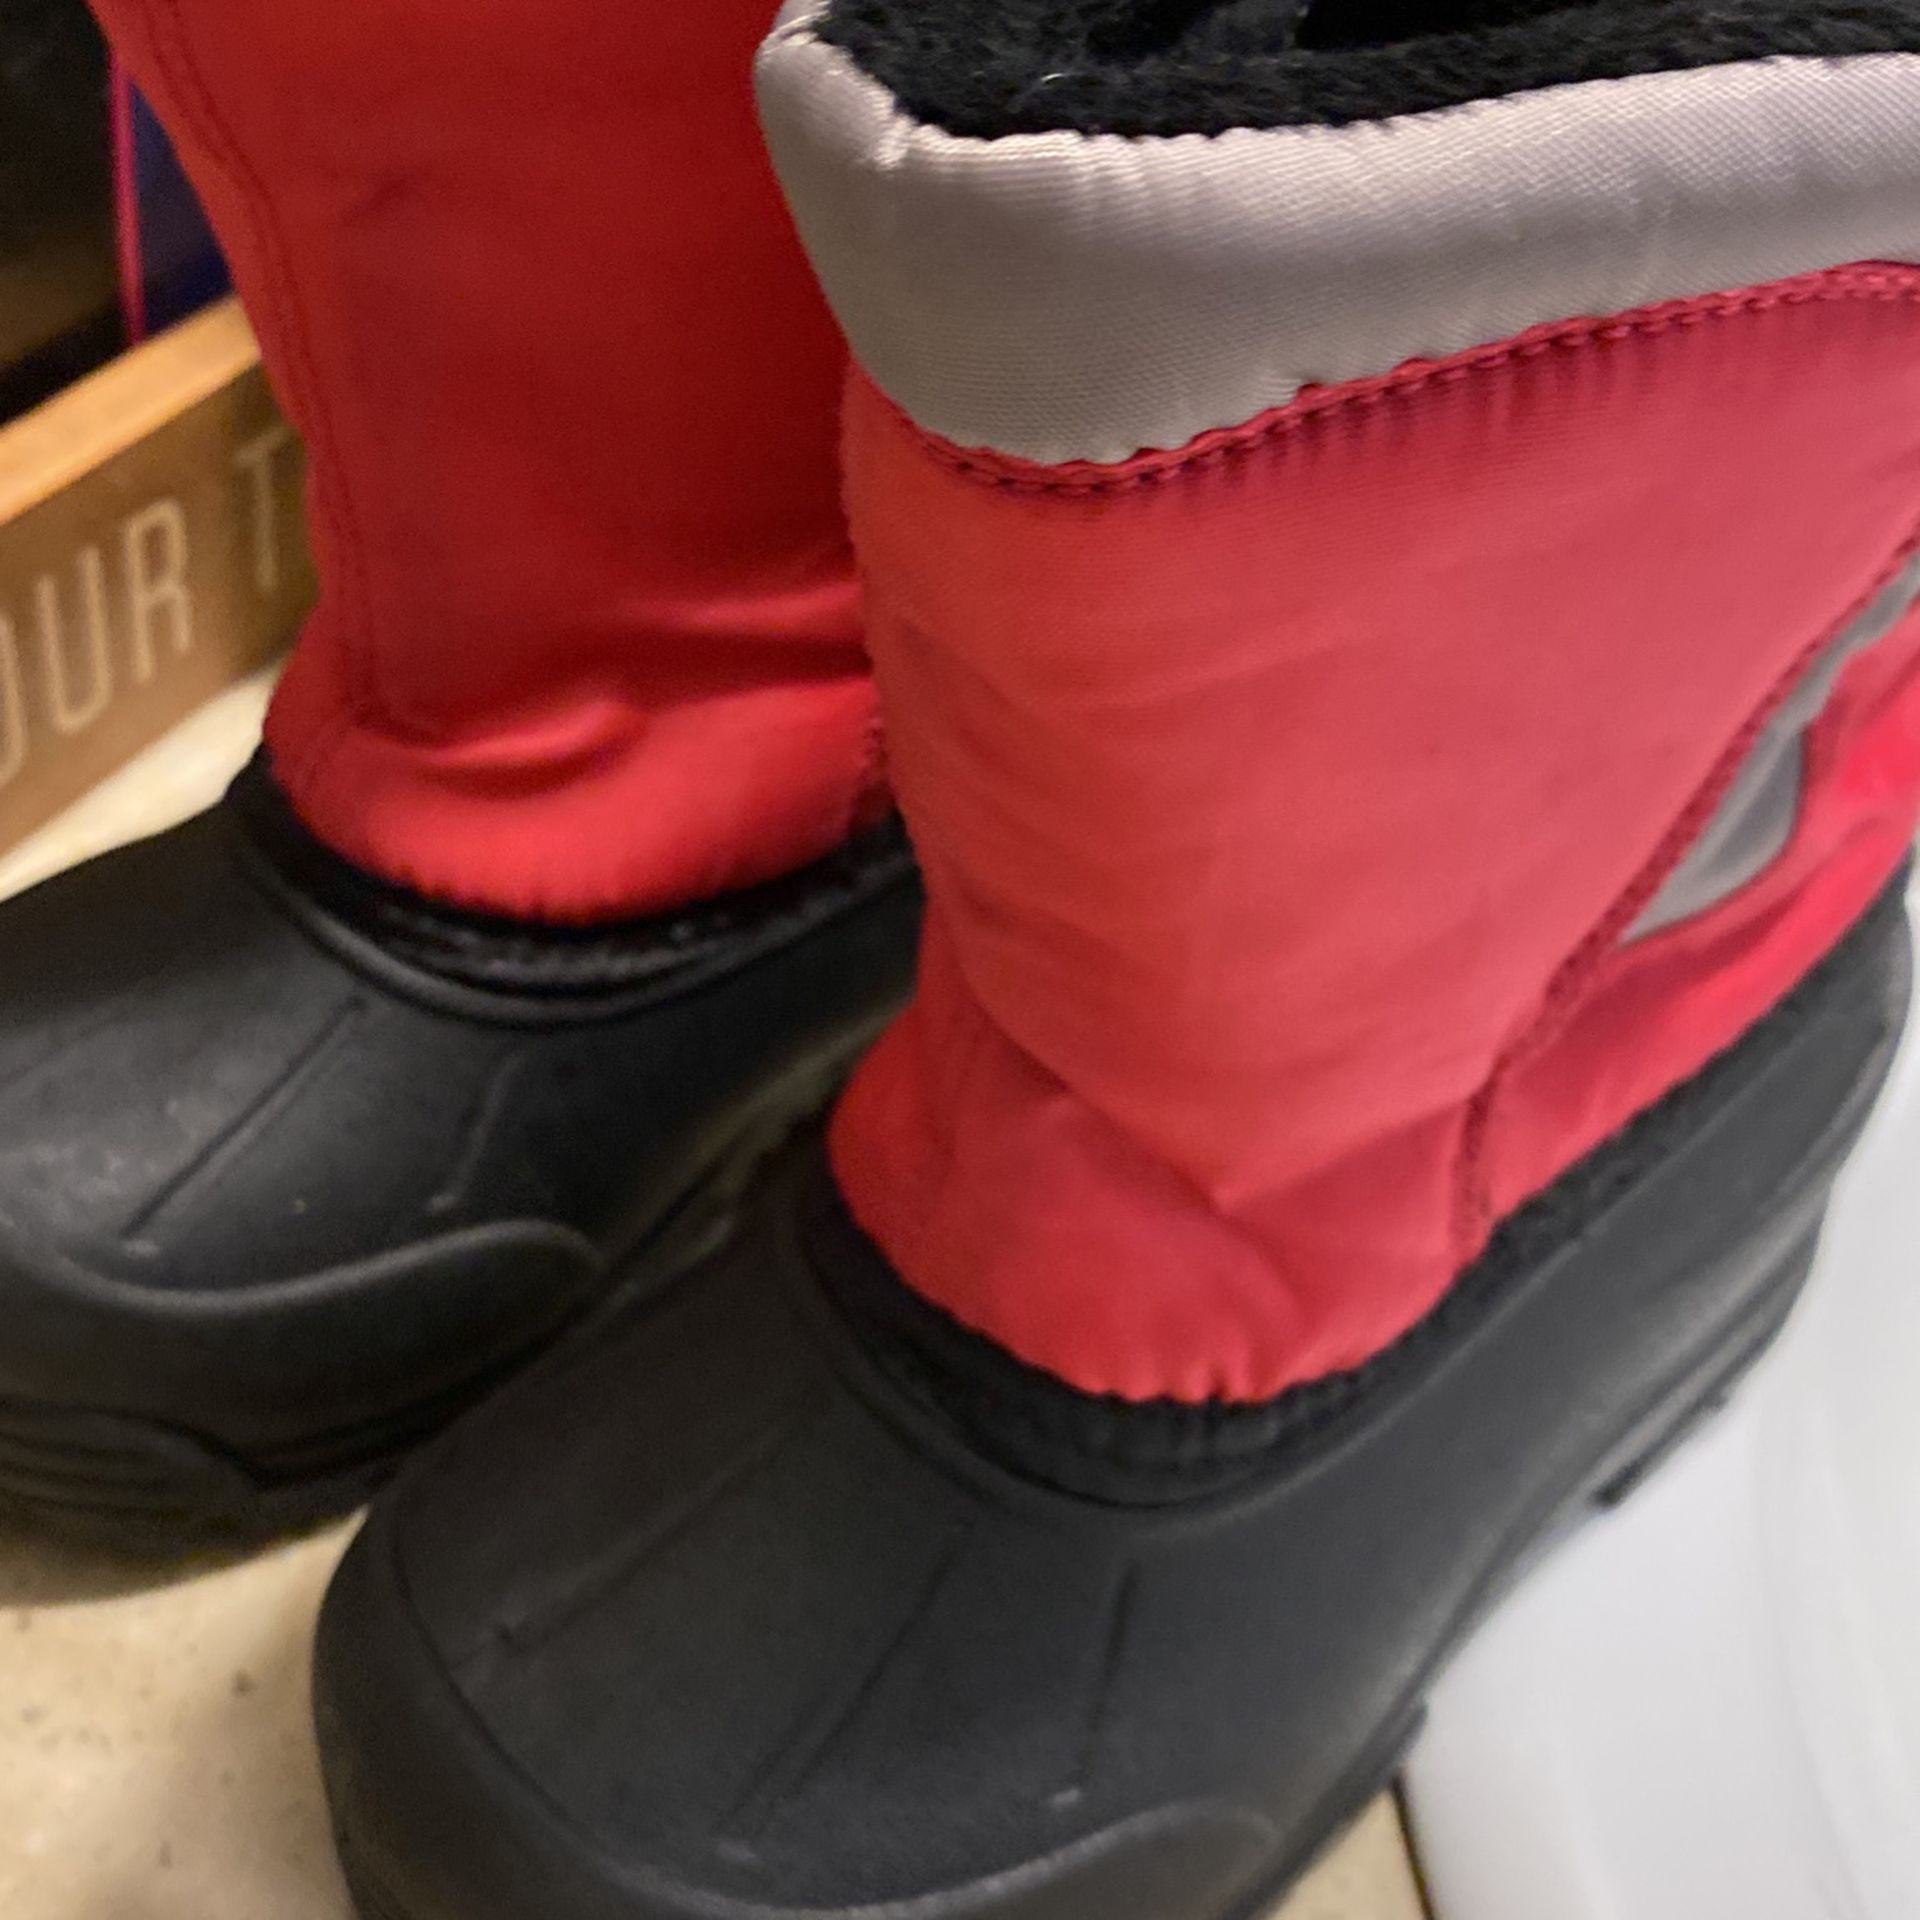 Great Boots For Kids Size 10 Used A Few Times They Are Like New!